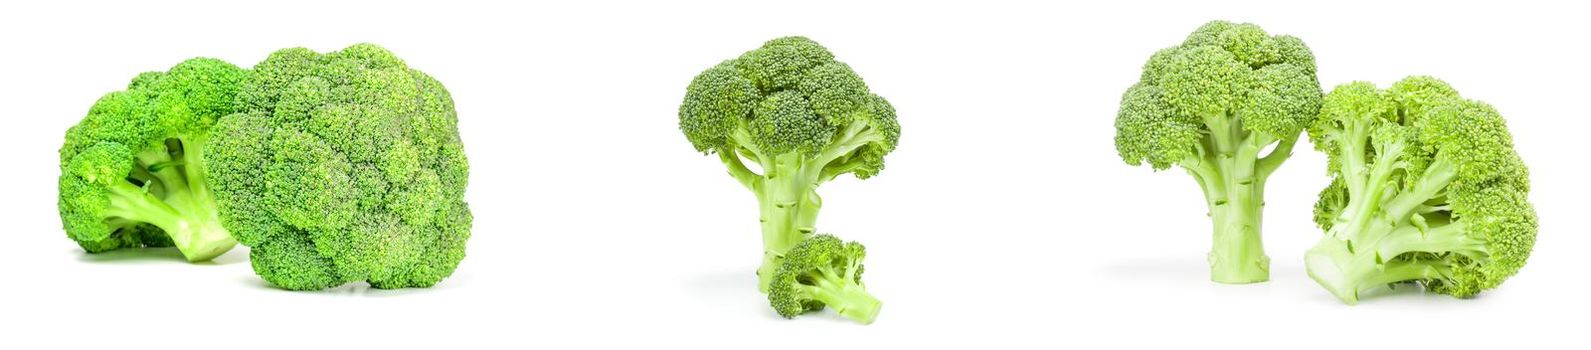 Set of fresh head of broccoli isolated on a white background cutout